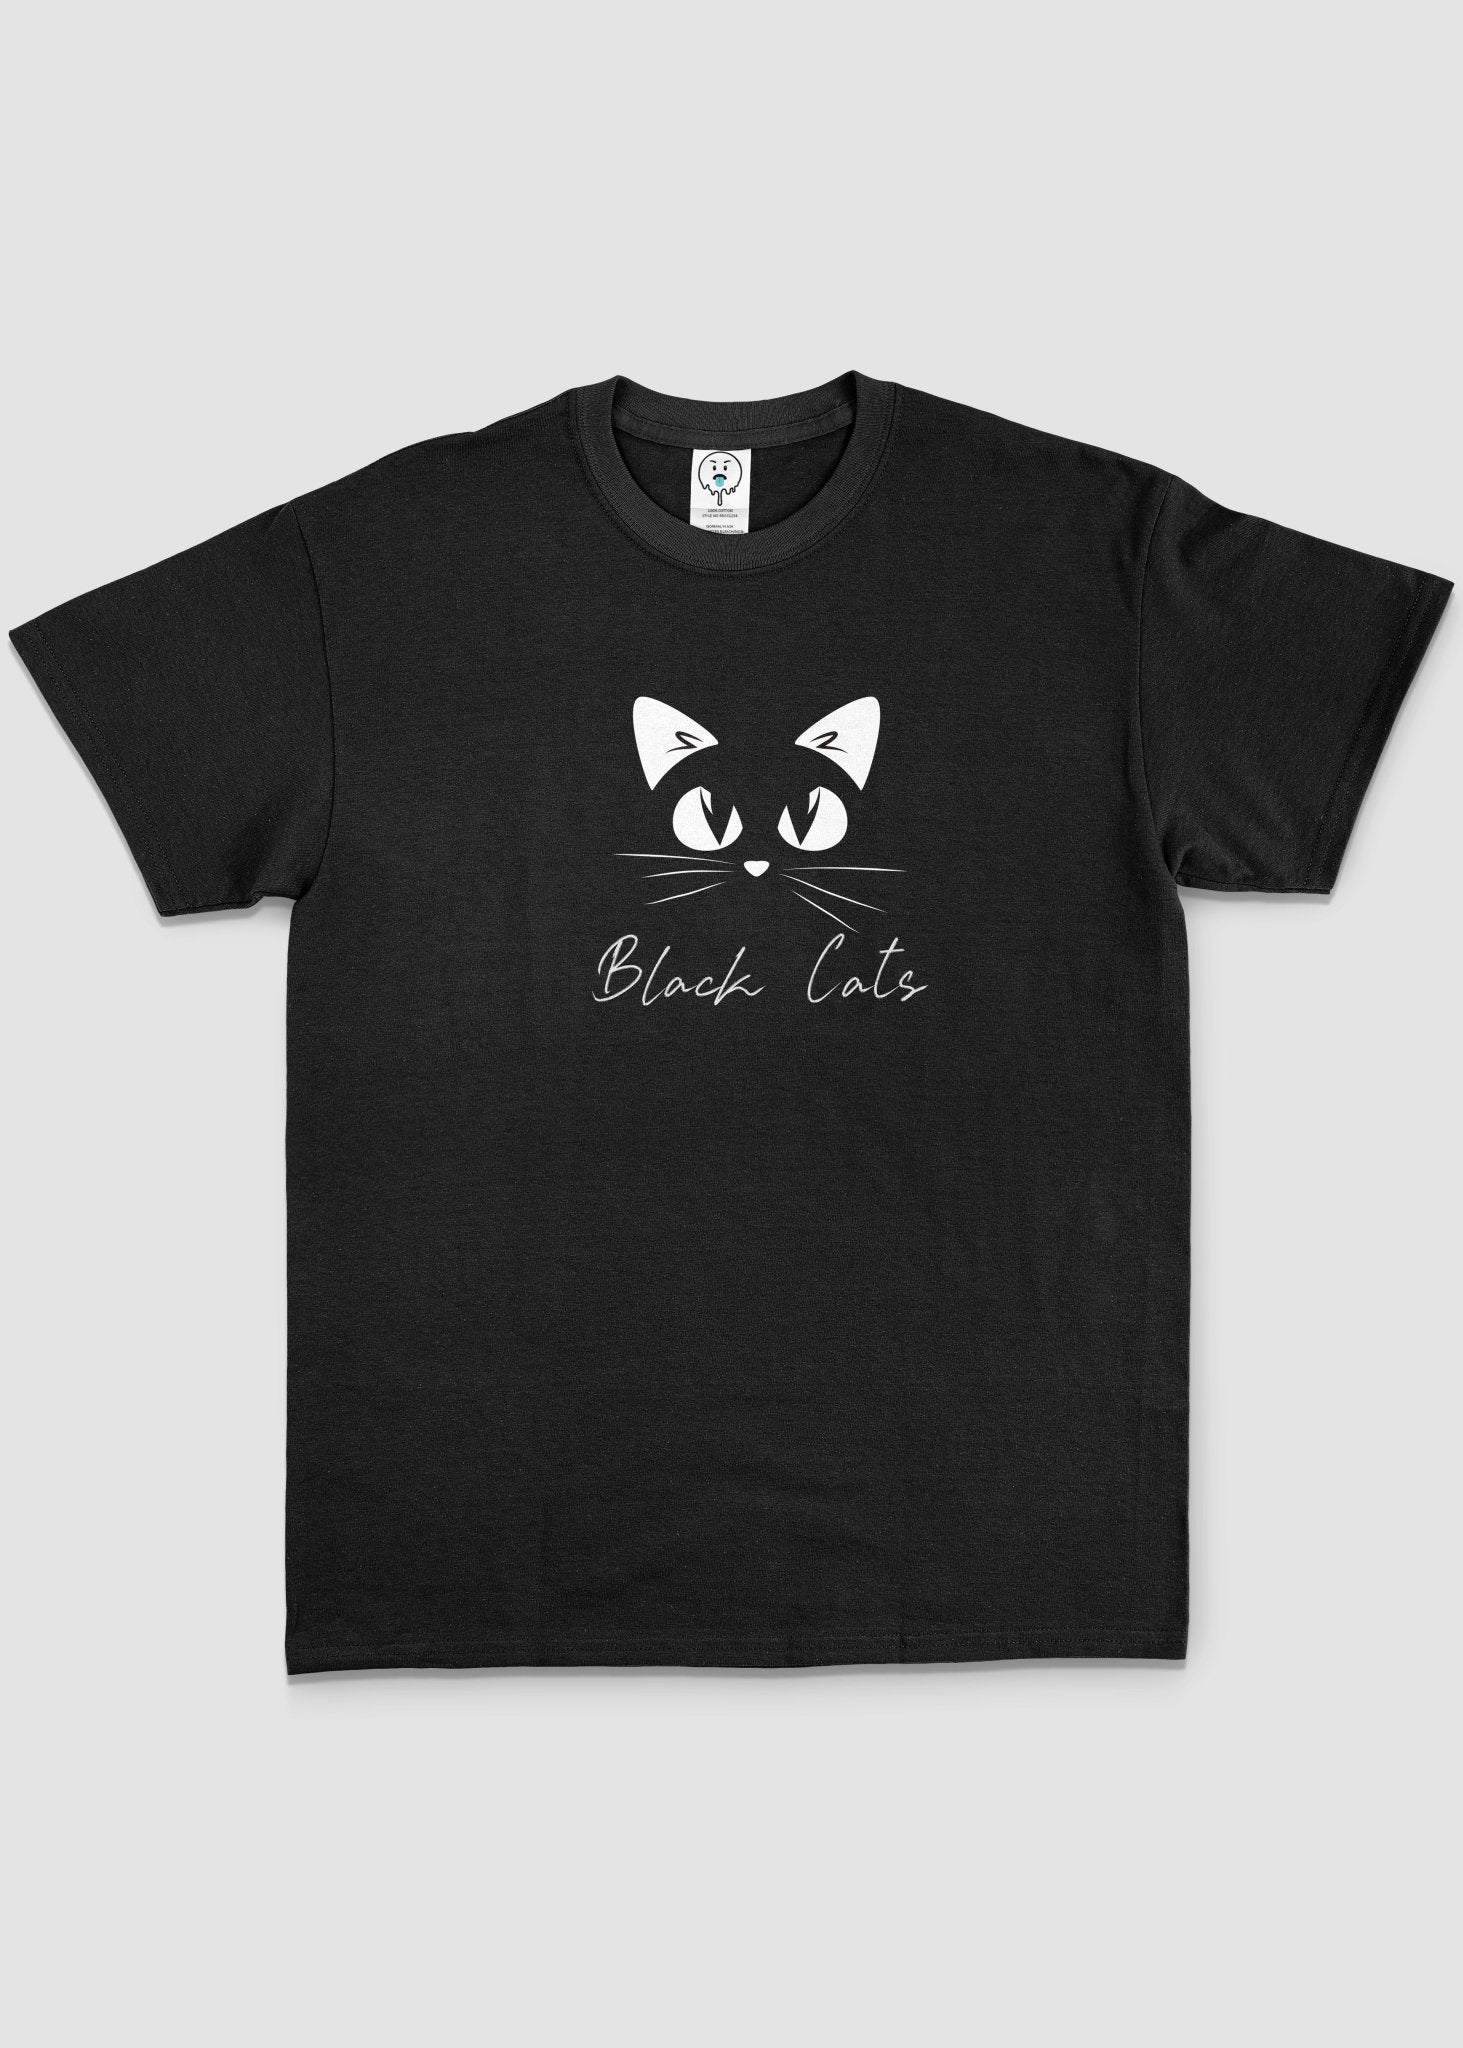 Black Cats Graphic T-Shirt - In Control Clothing